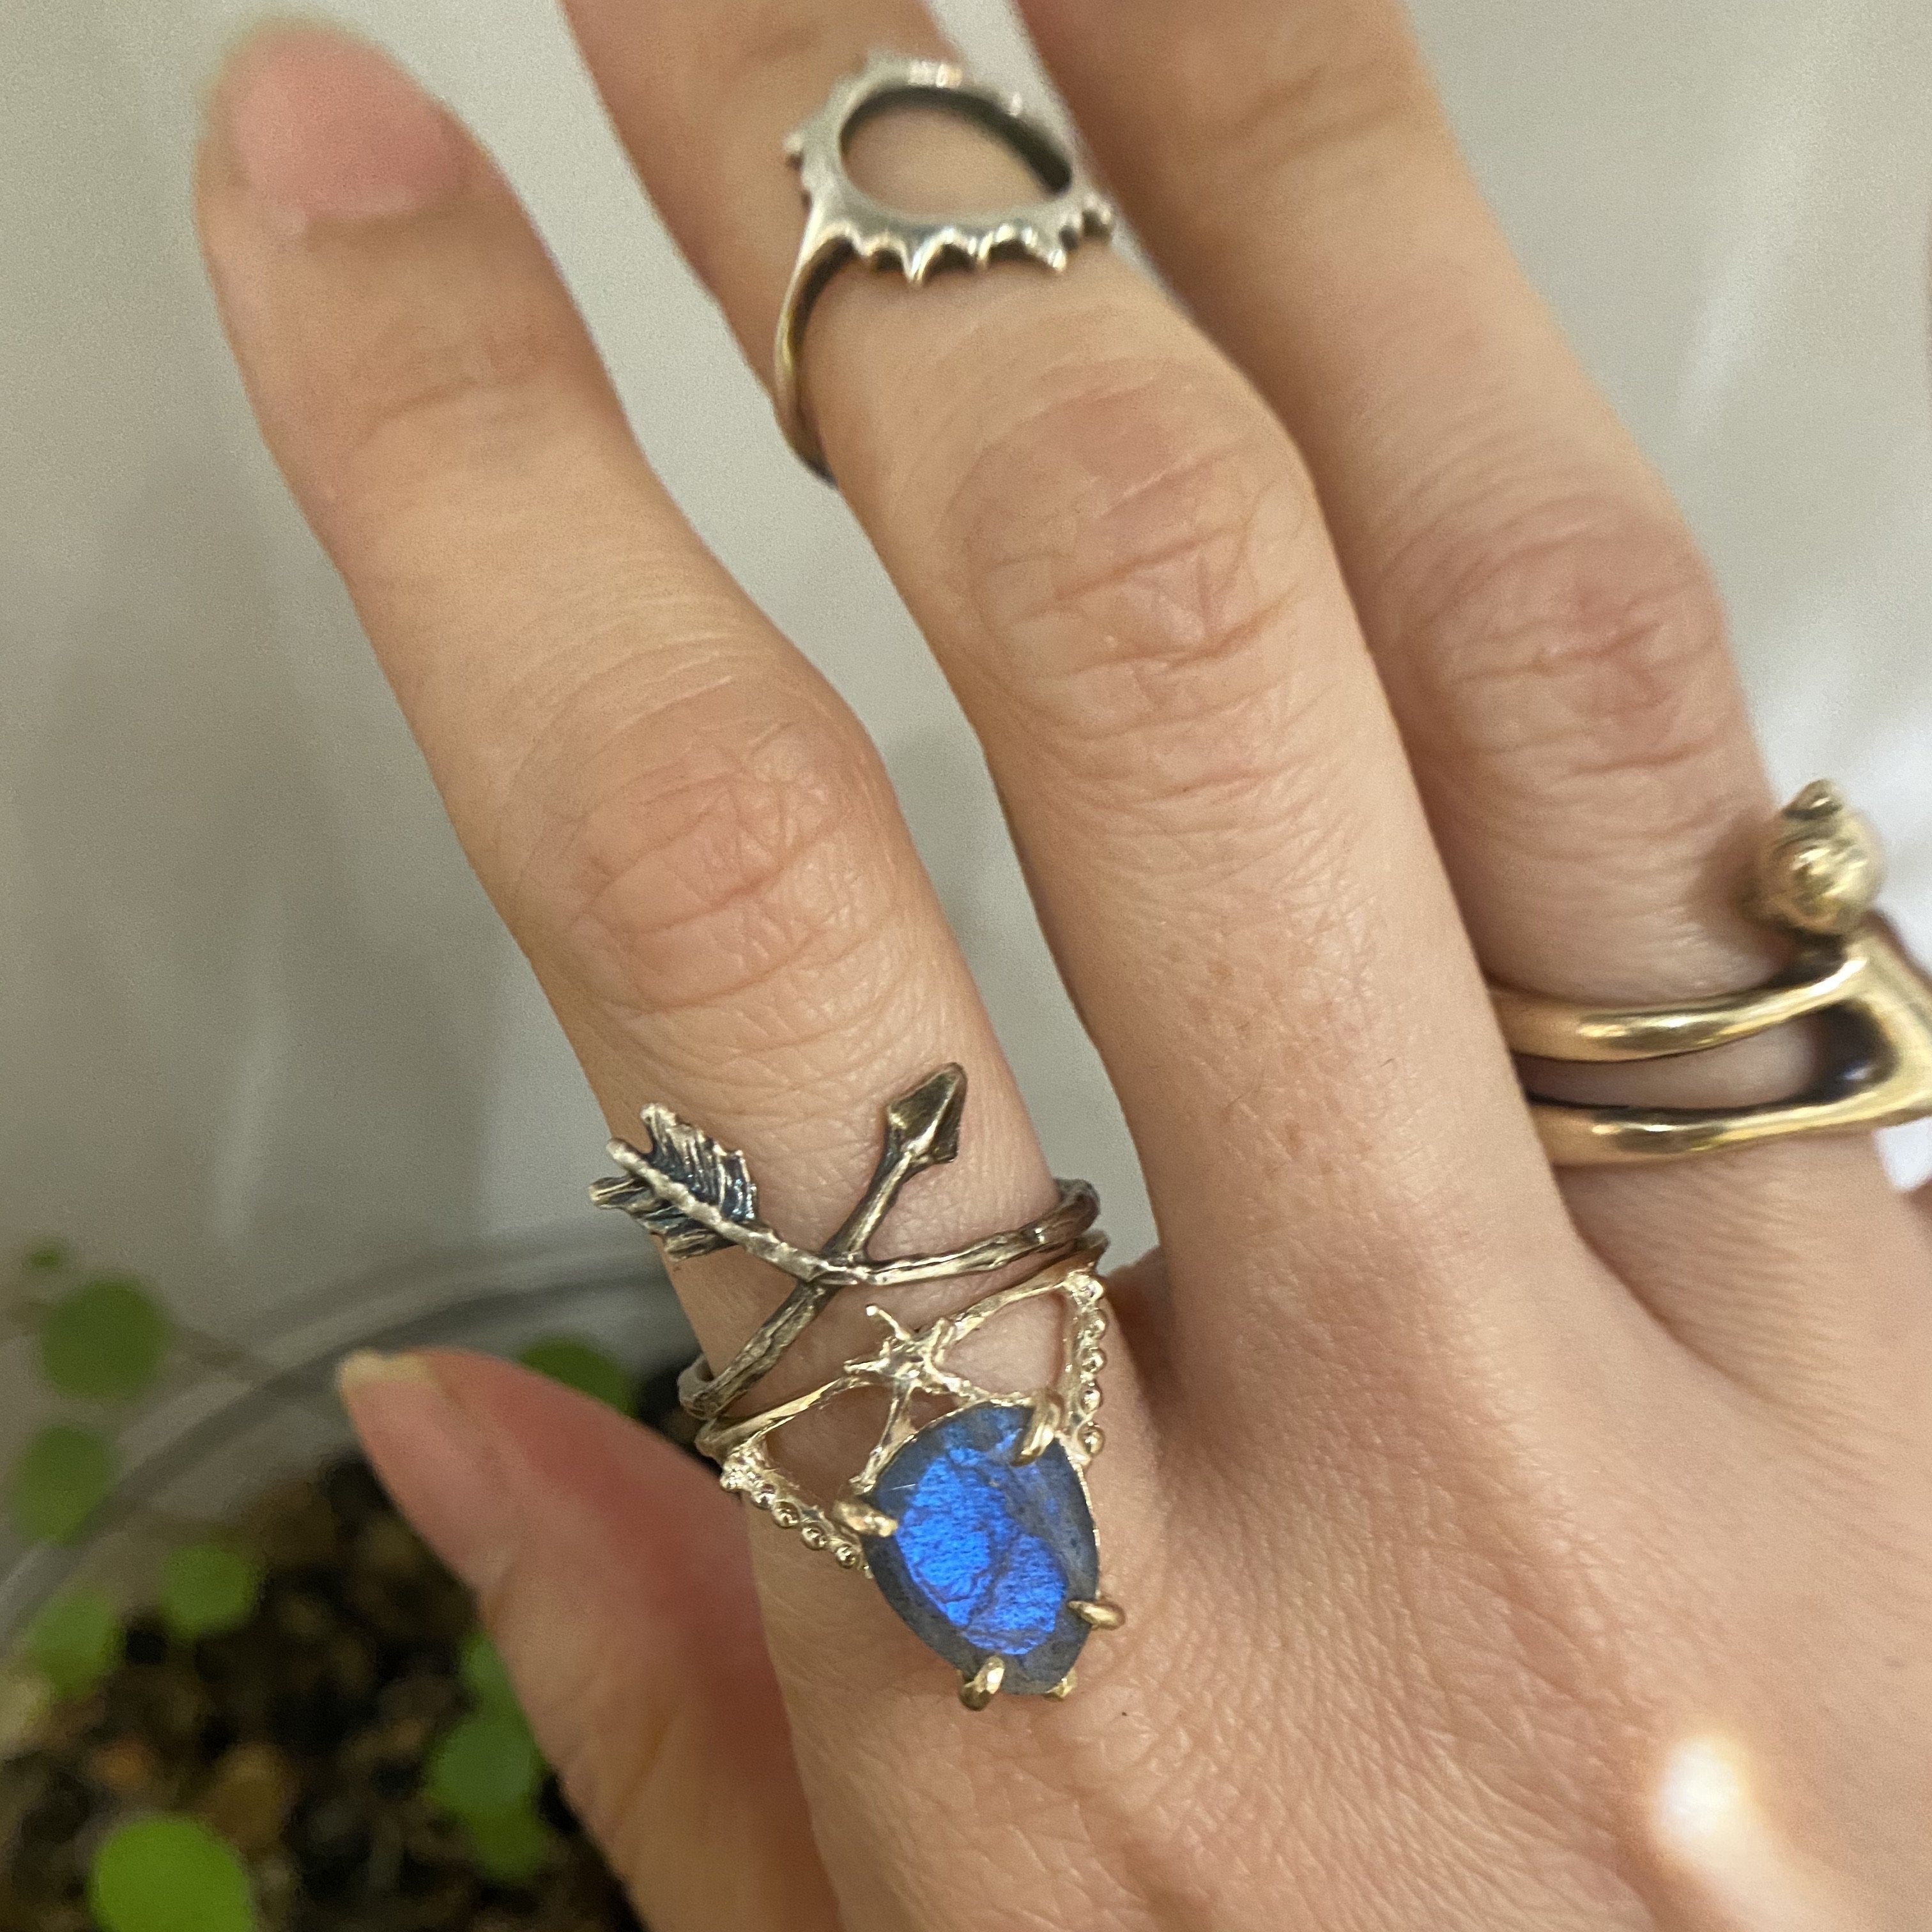 Labradorite Ring with Tiny Gold Textured Star (10k)